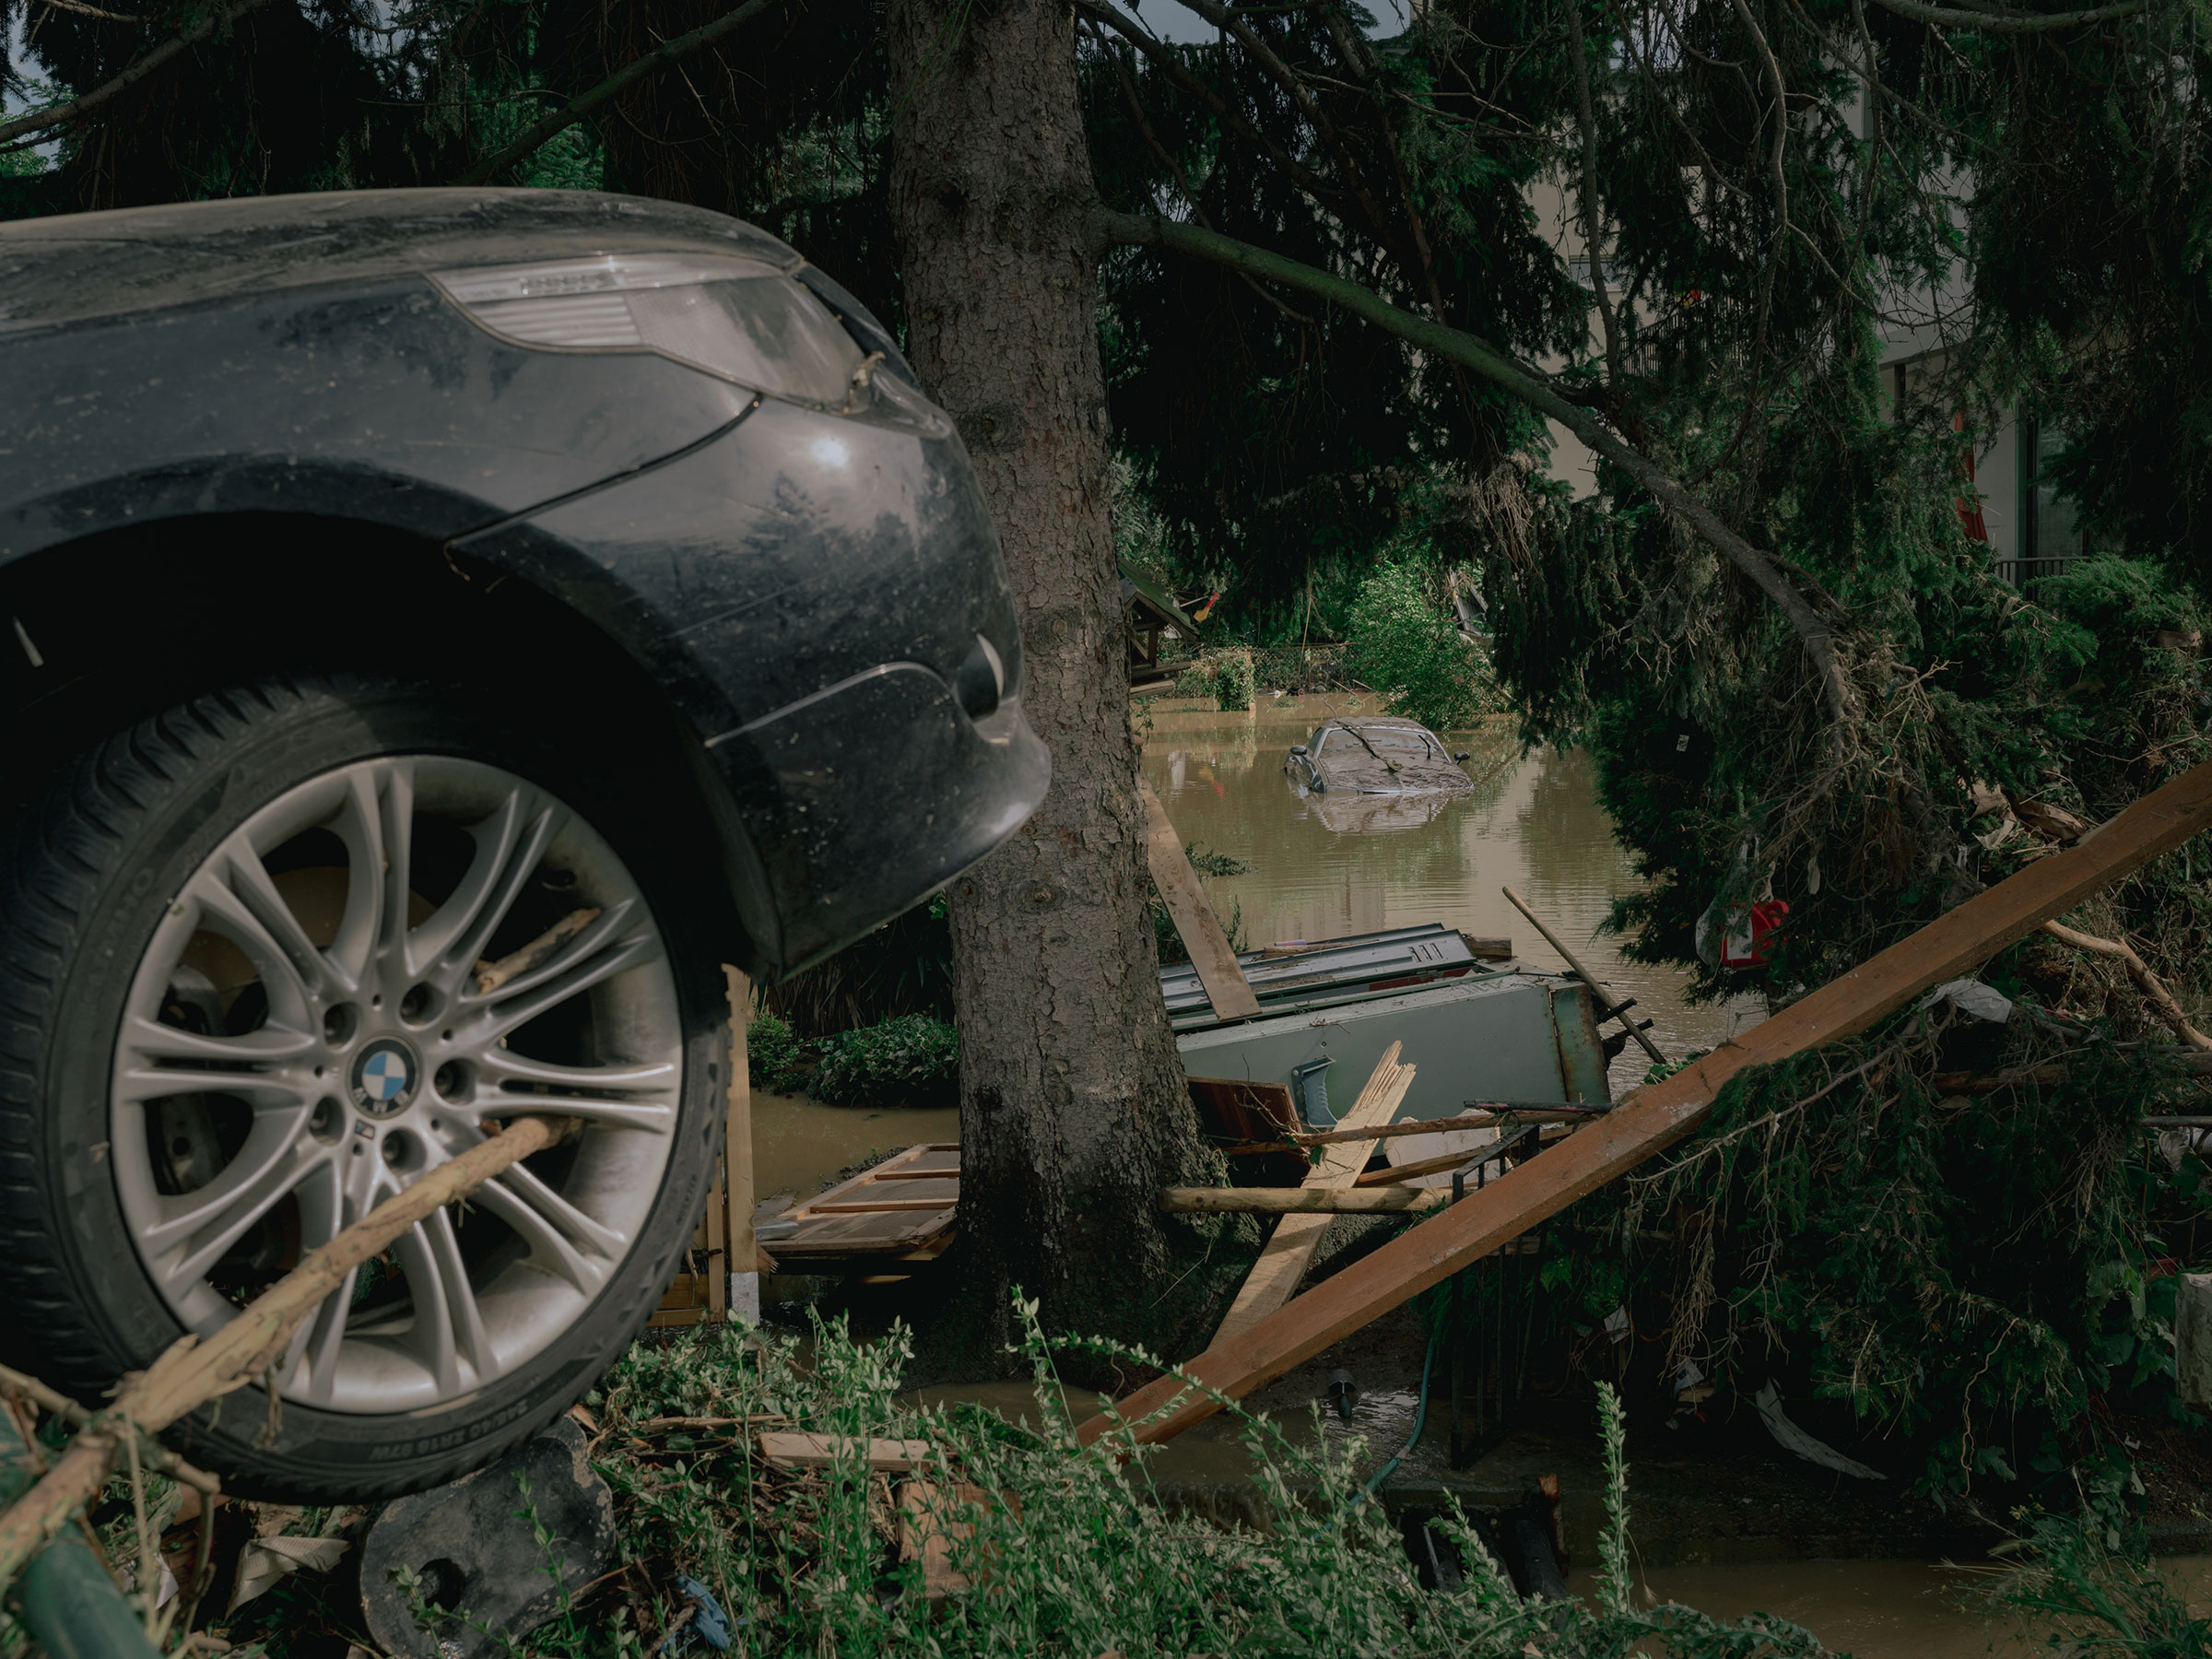 Cars and flood damage in the village of Ahrweiler, Germany, on July 15. (DOCKS Collective)